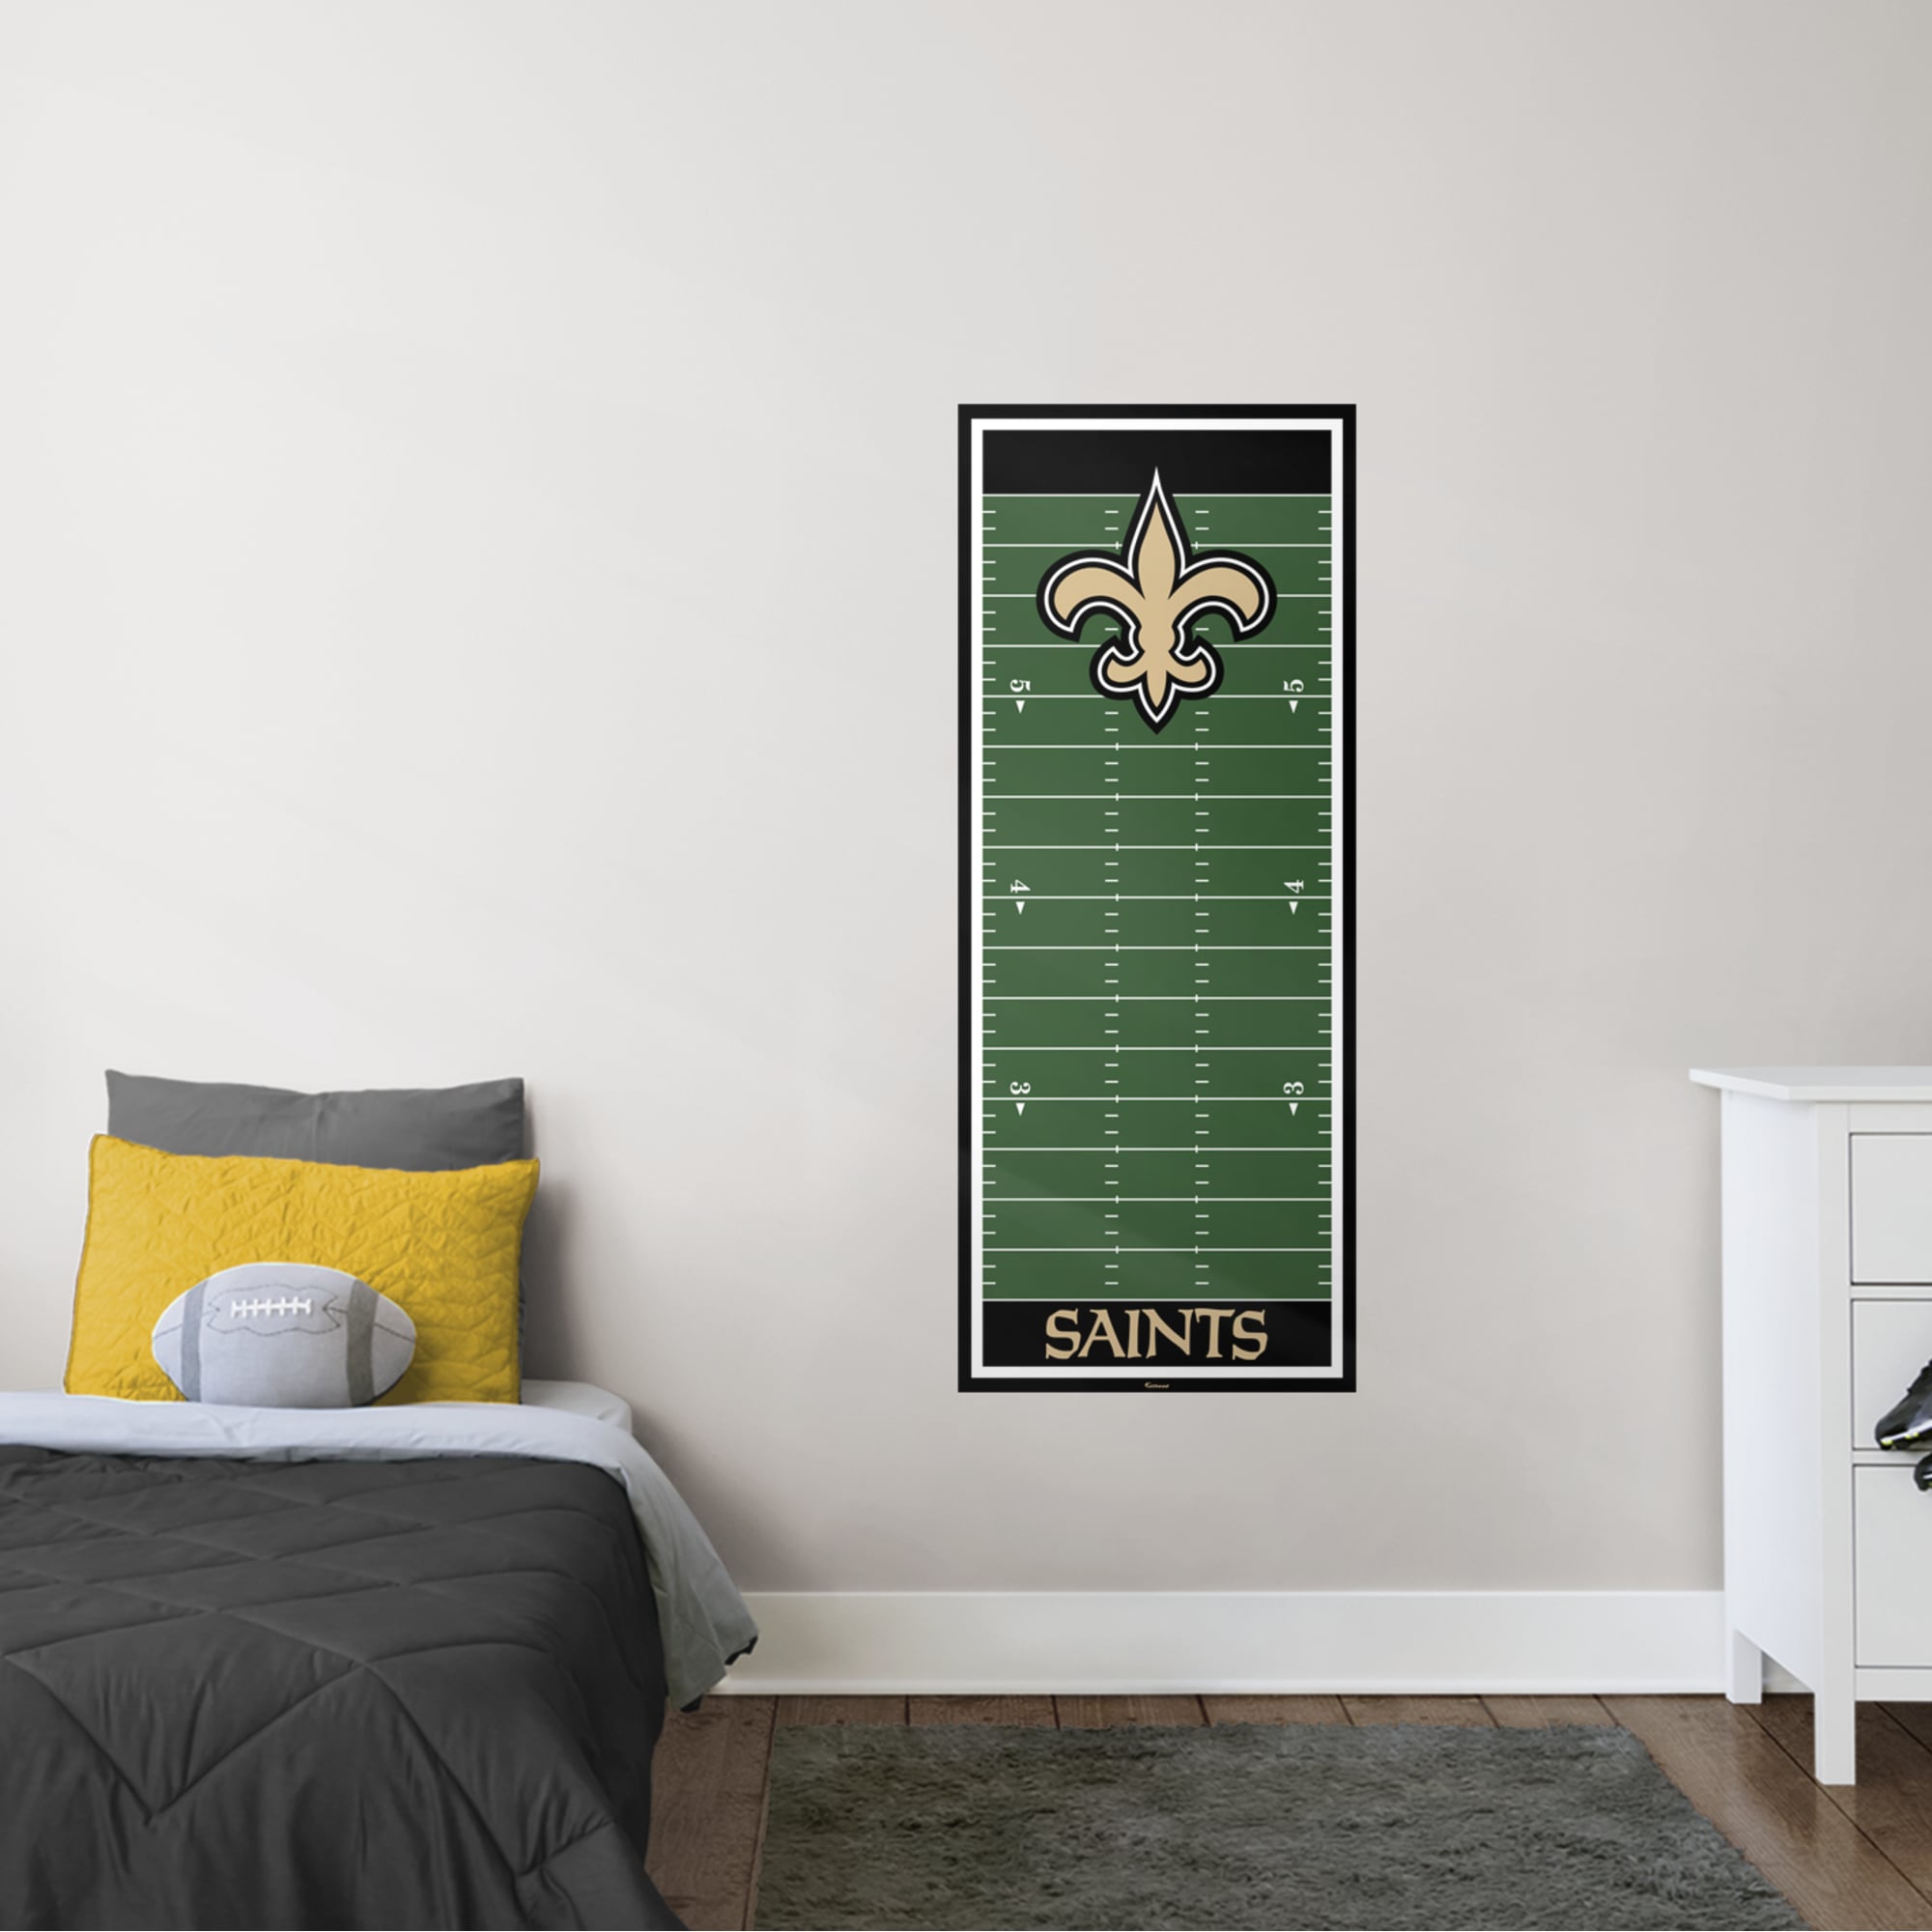 New Orleans Saints: Growth Chart - Officially Licensed NFL Removable Wall Graphic 24.0"W x 59.0"H by Fathead | Vinyl